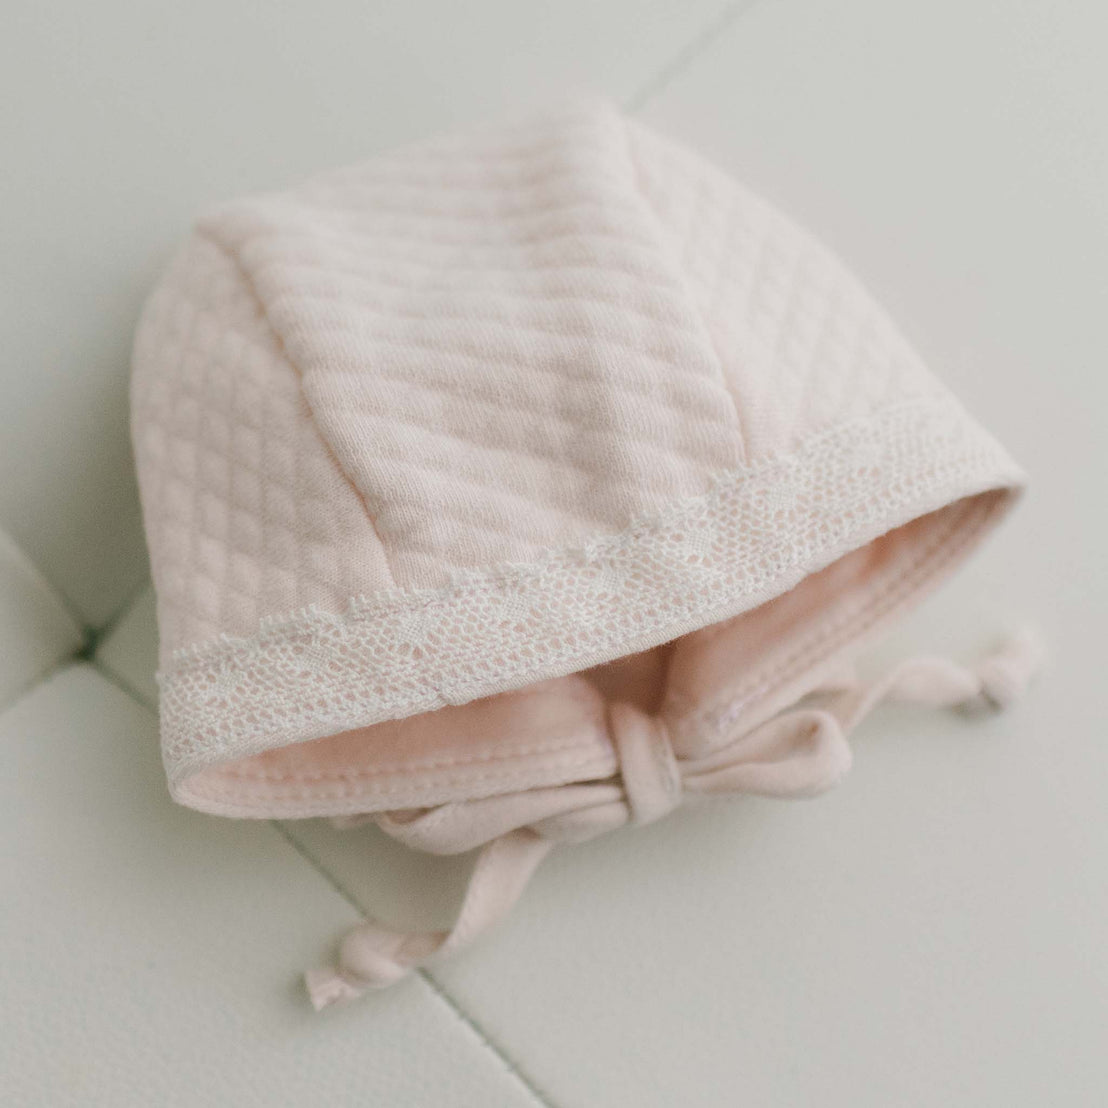 Top of pink cotton baby girl bonnet